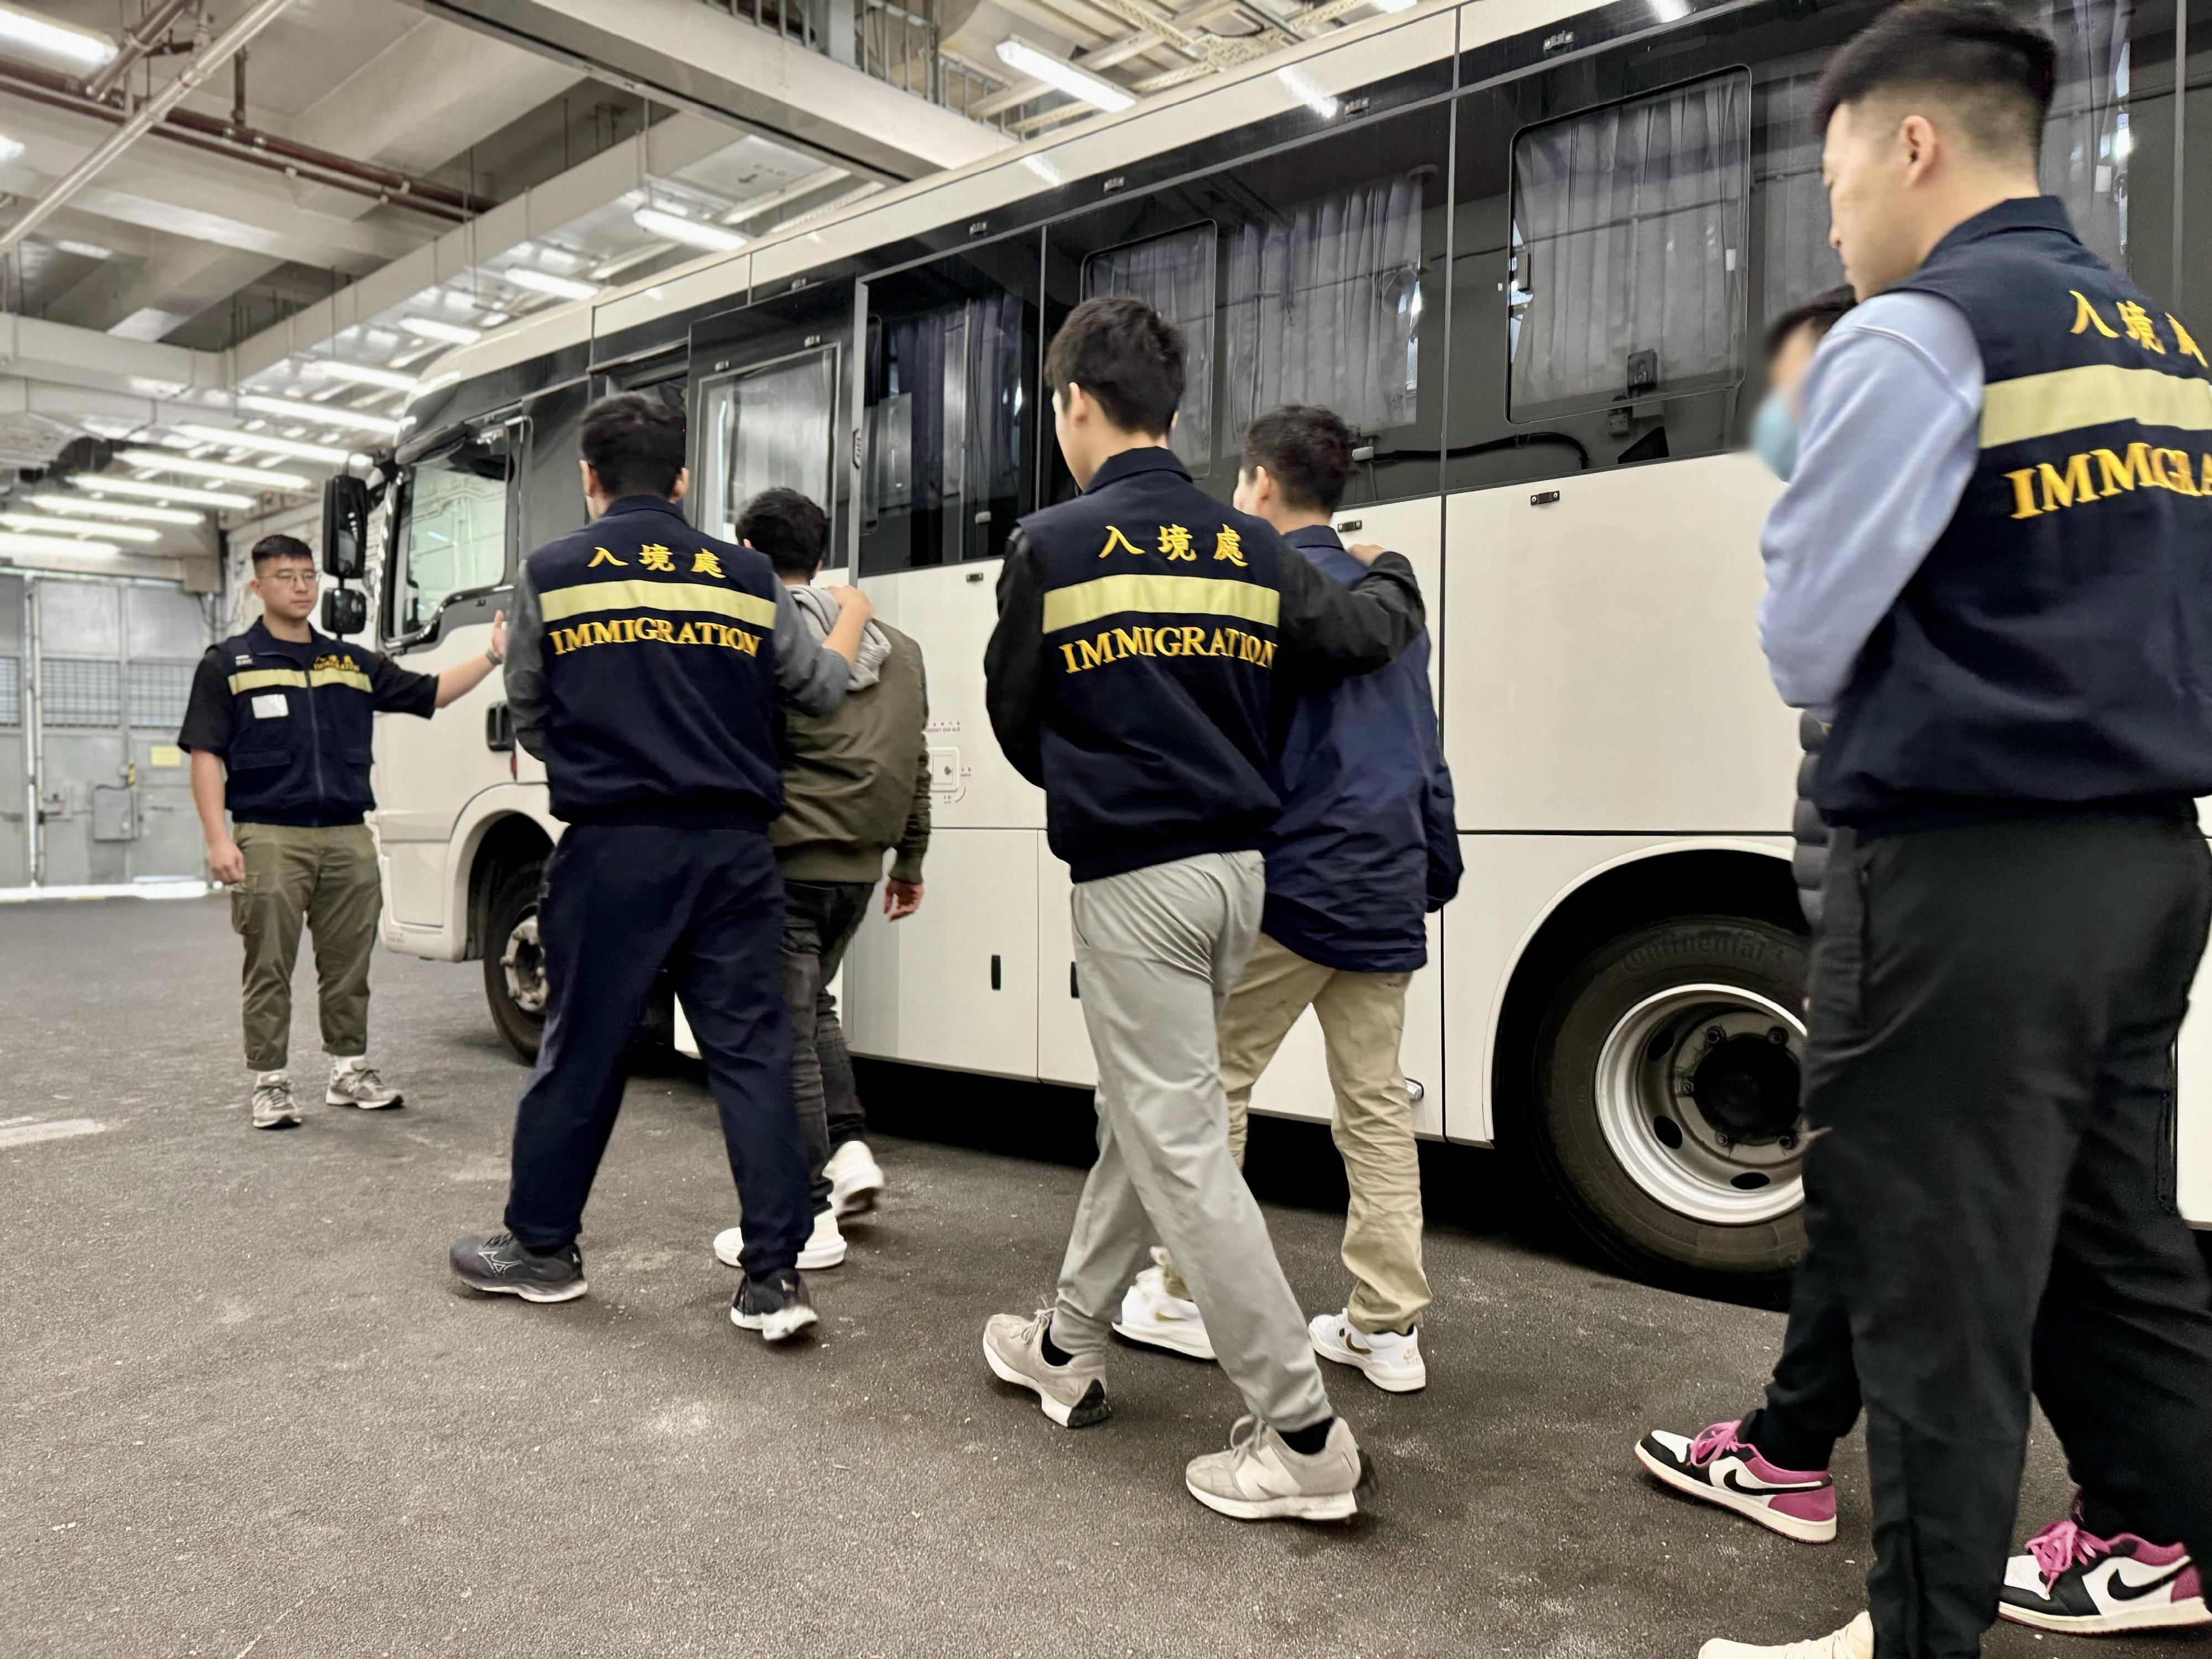 The Immigration Department (ImmD) carried out a repatriation operation today (February 27). A total of 23 Vietnamese illegal immigrants were repatriated to Vietnam. Photo shows removees being escorted by ImmD officers to proceed from the detention place to the airport.